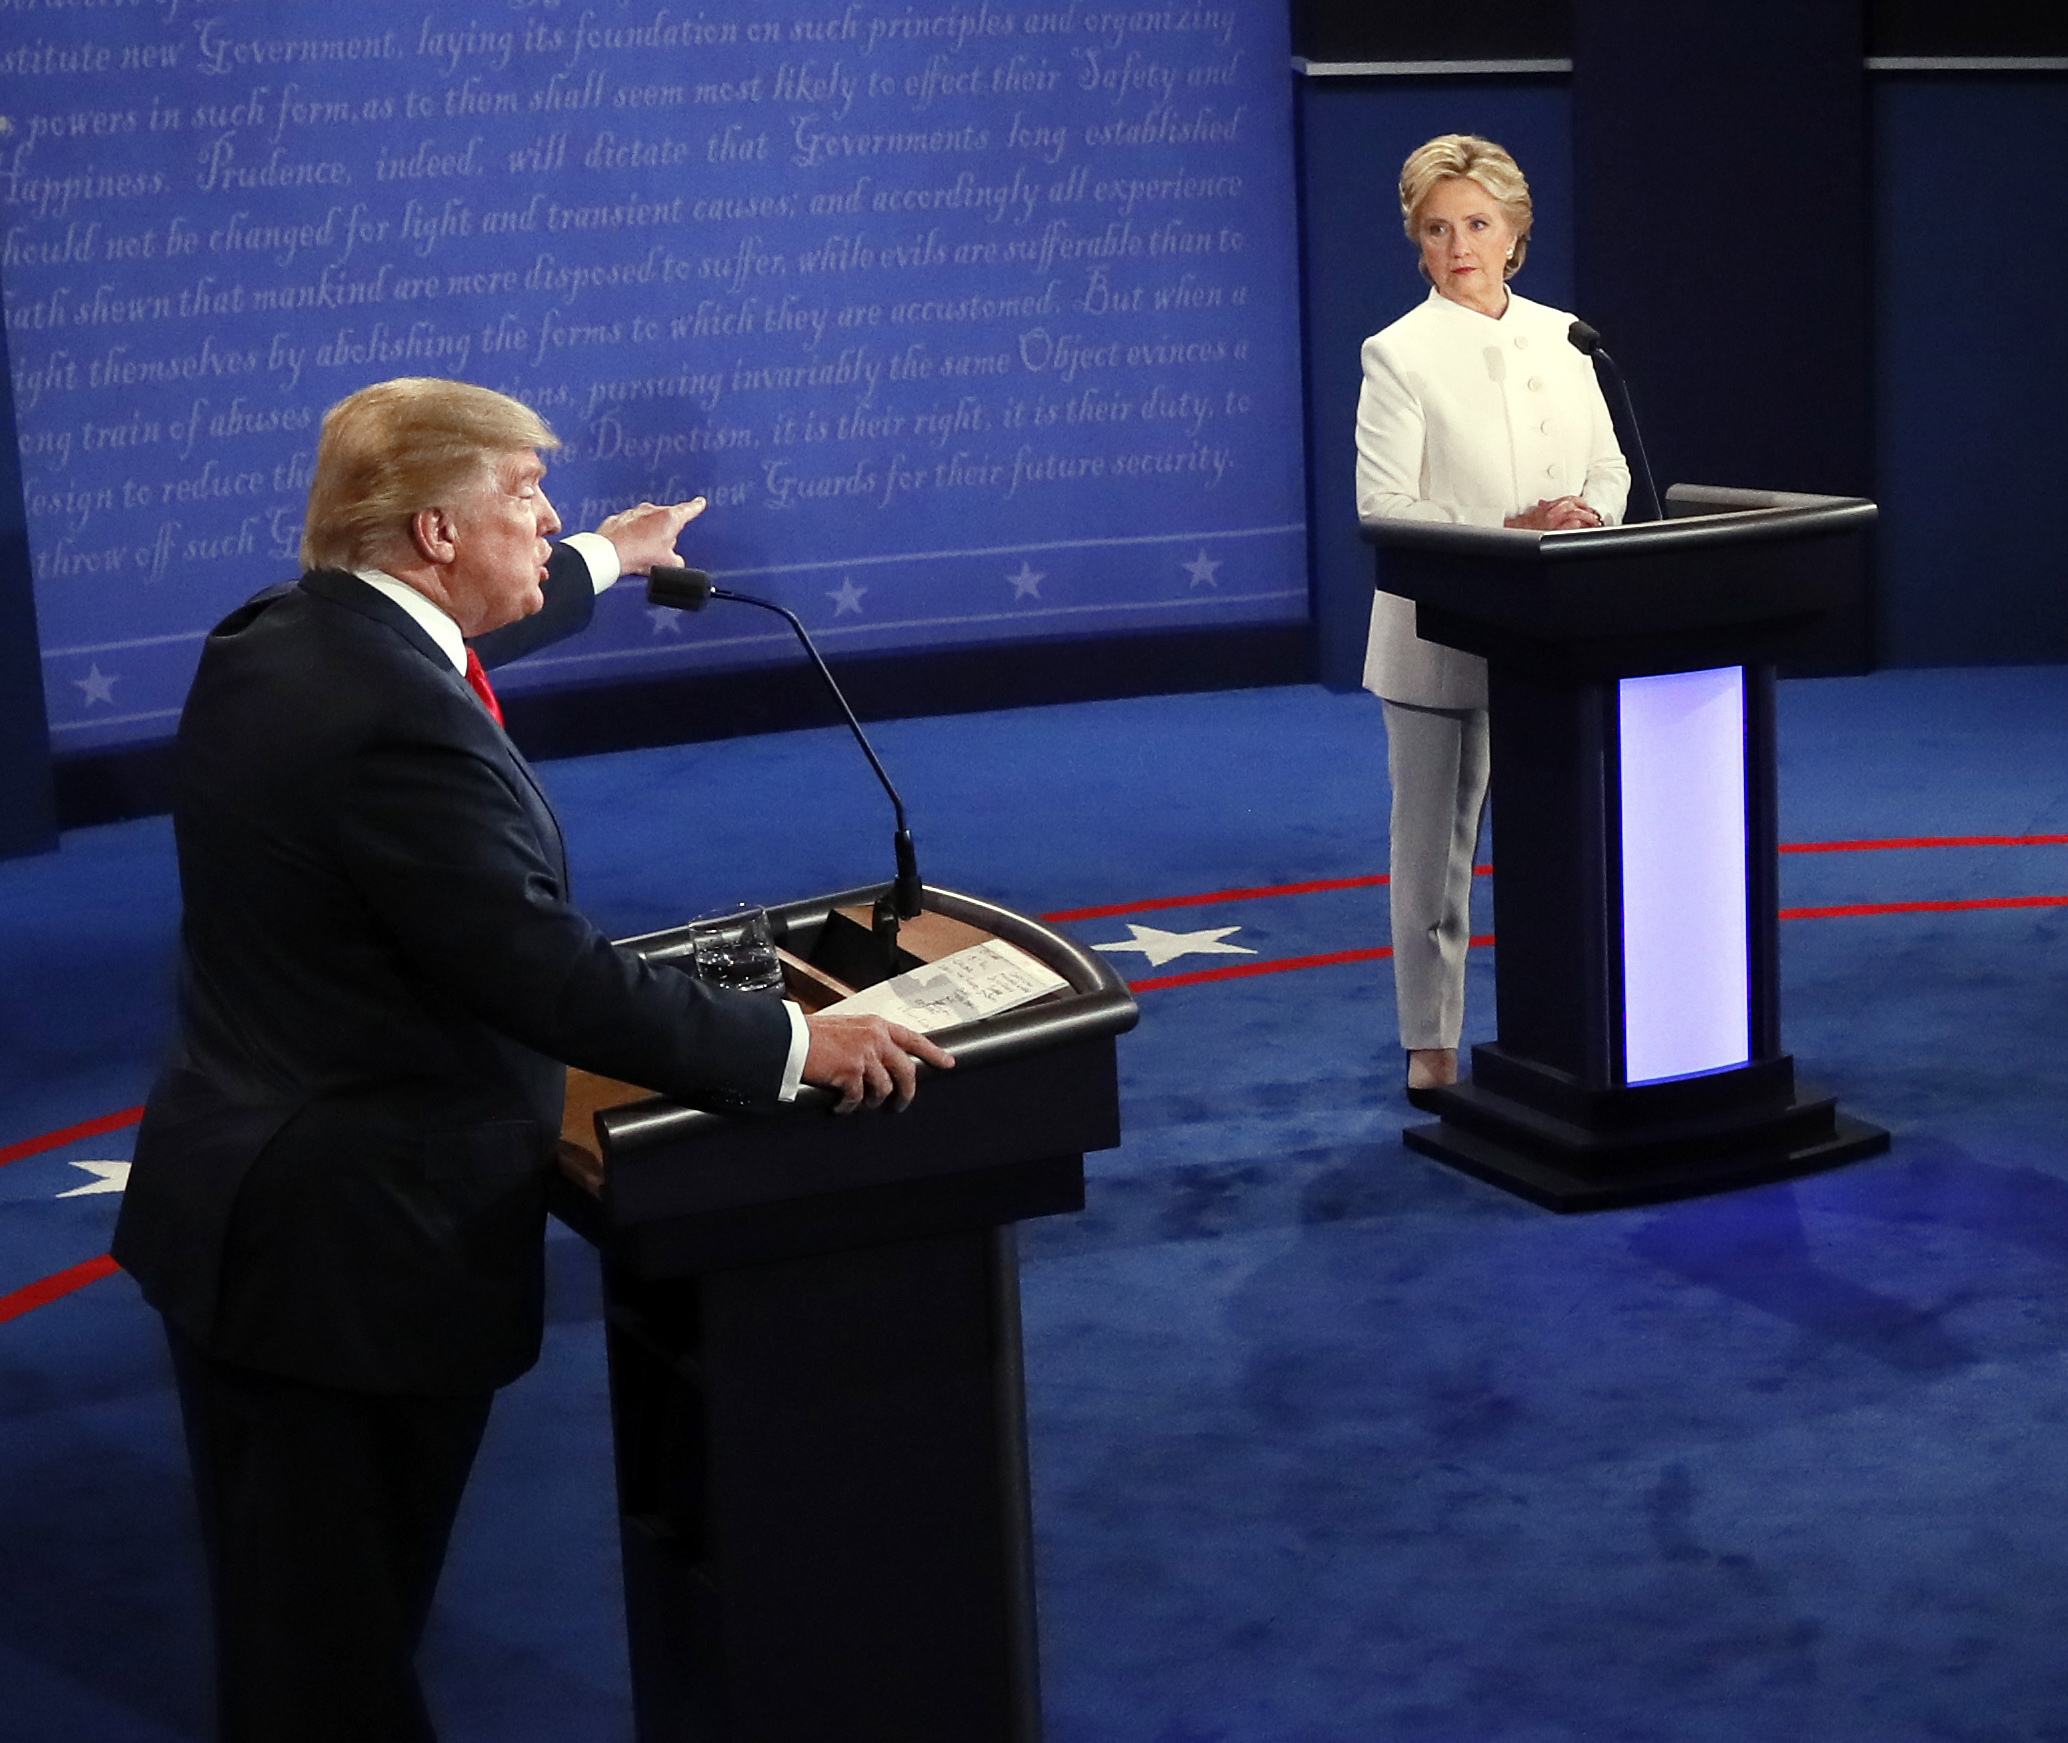 Republican presidential nominee Donald Trump debates Democratic presidential nominee Hillary Clinton during the third presidential debate at UNLV in Las Vegas, on Wednesday.